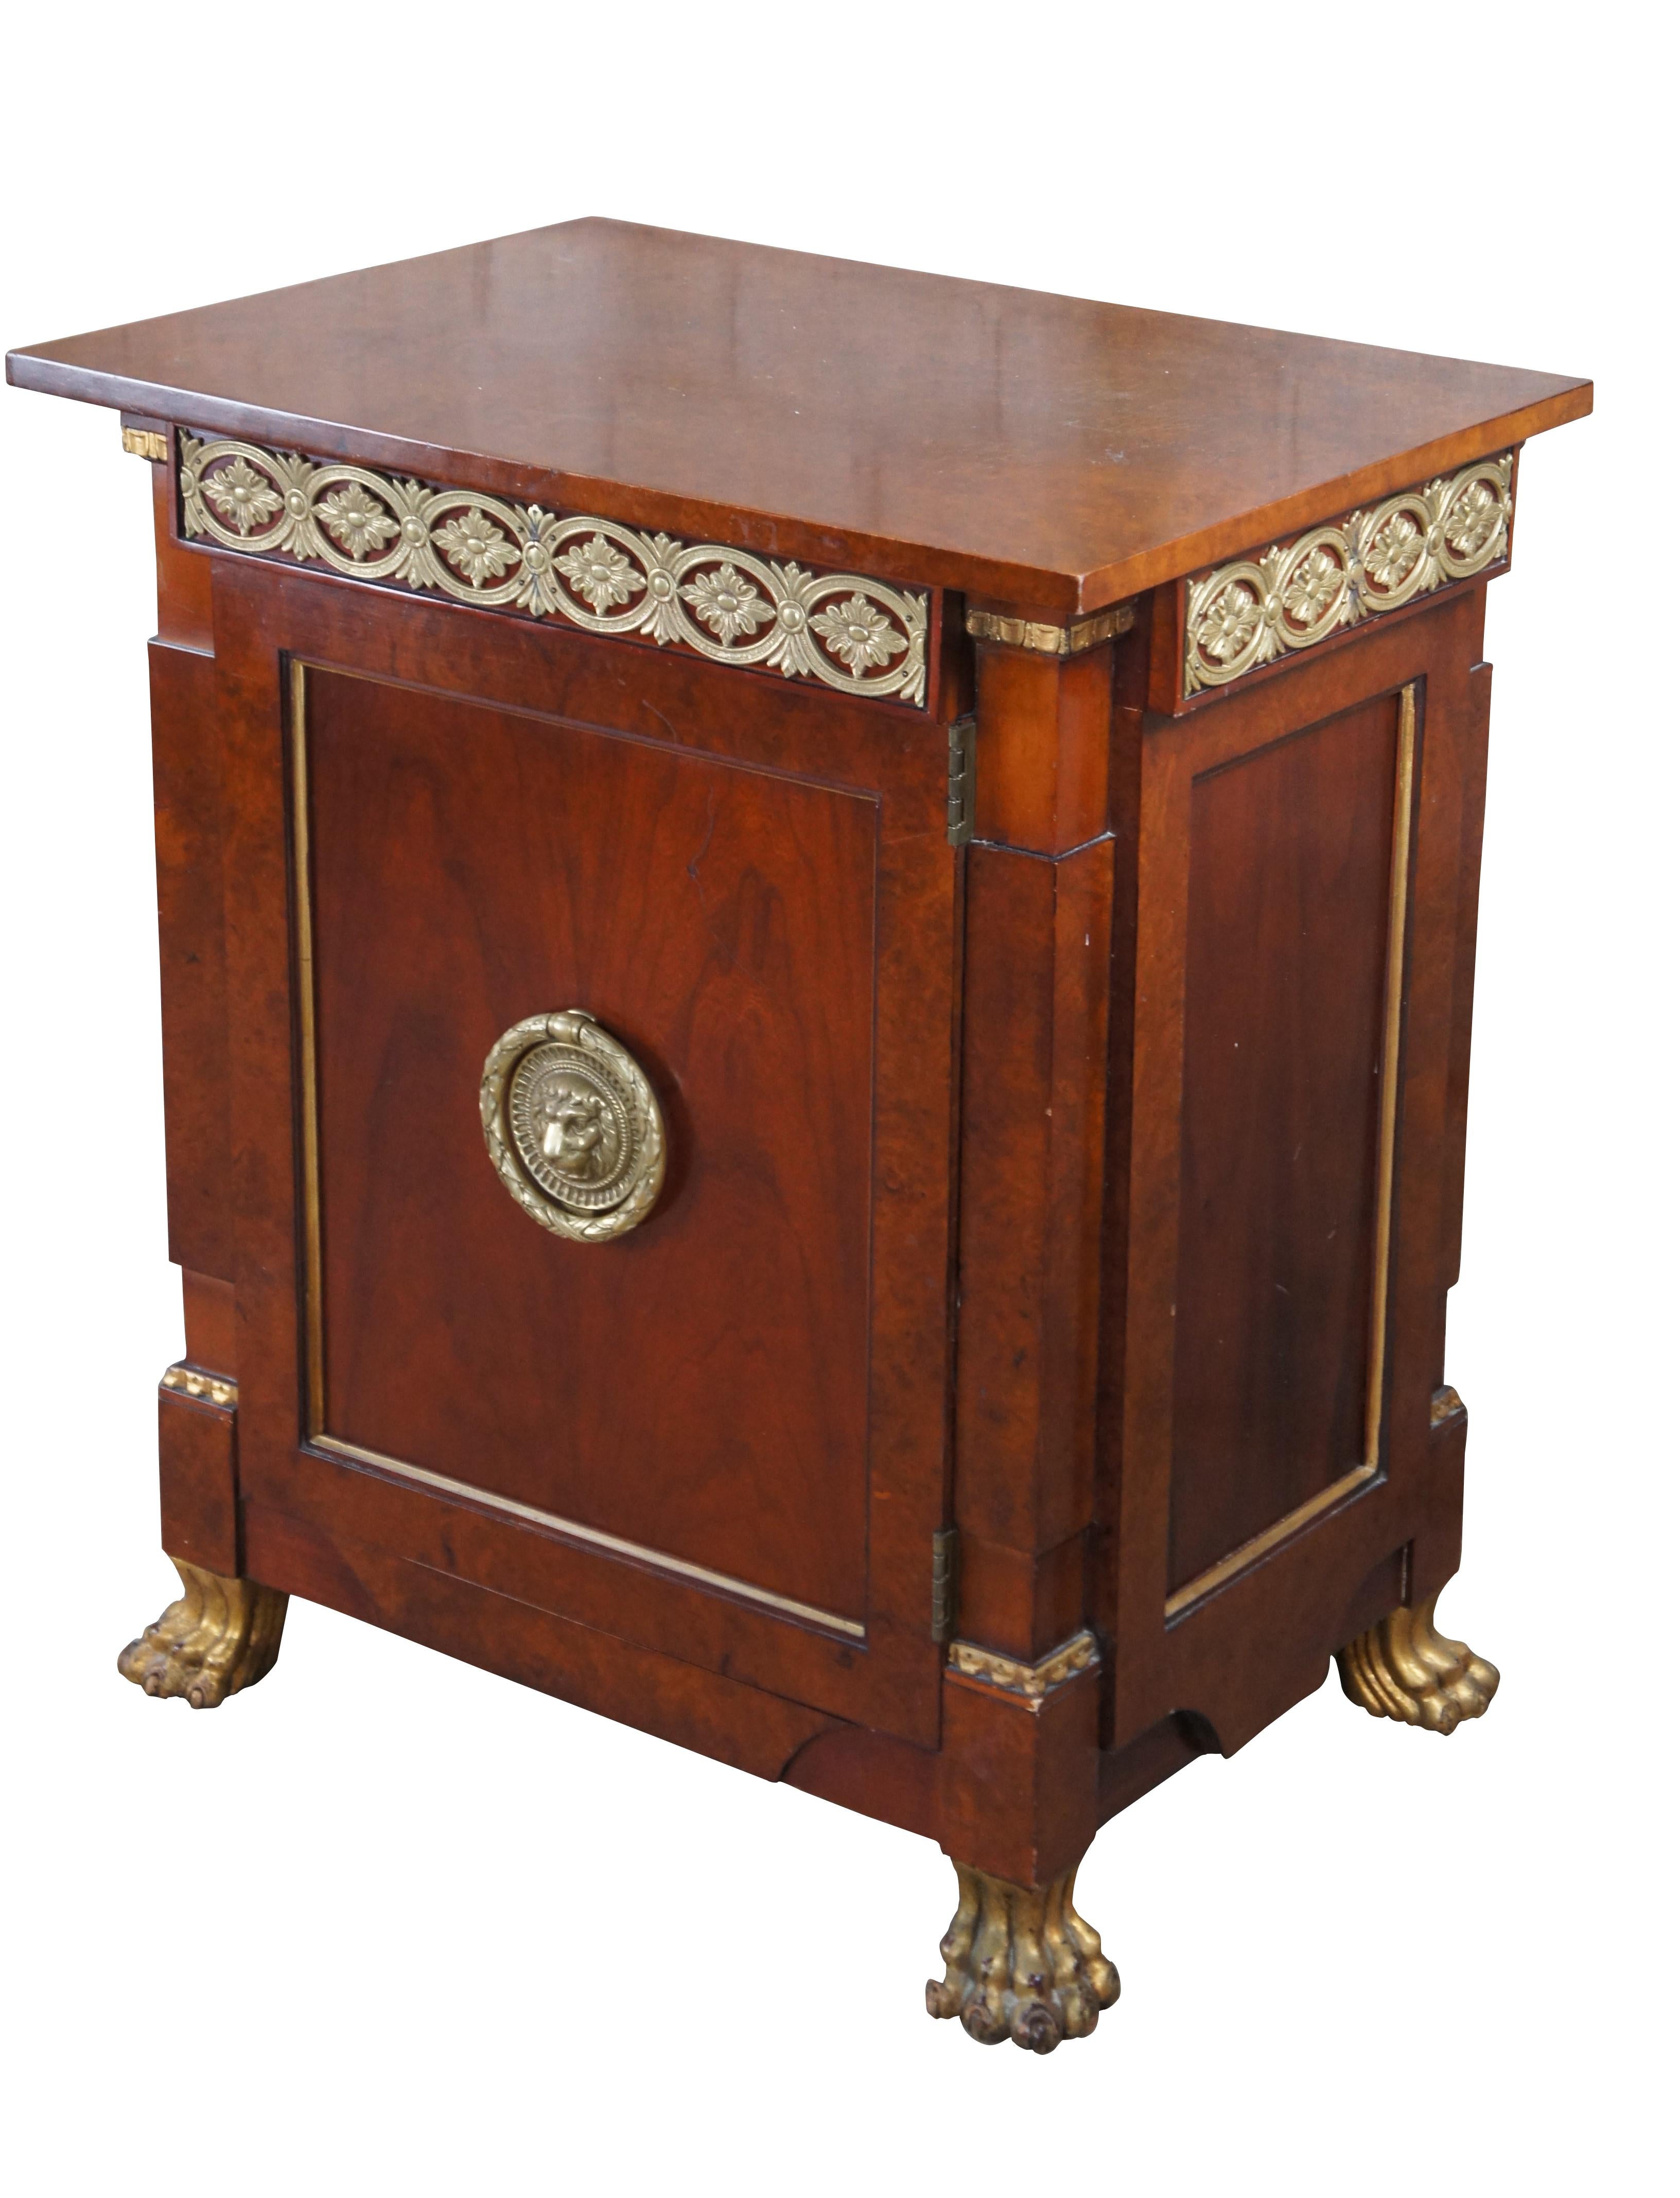 An exceptional nightstand or low cabinet by John Widdicomb. Part of their Russian Collection designed by Chad Womack in the 1970s. Features a cherry case with inset panels trimmed in brass, burled surfaces, gilt ormolu and paw feet. Features a